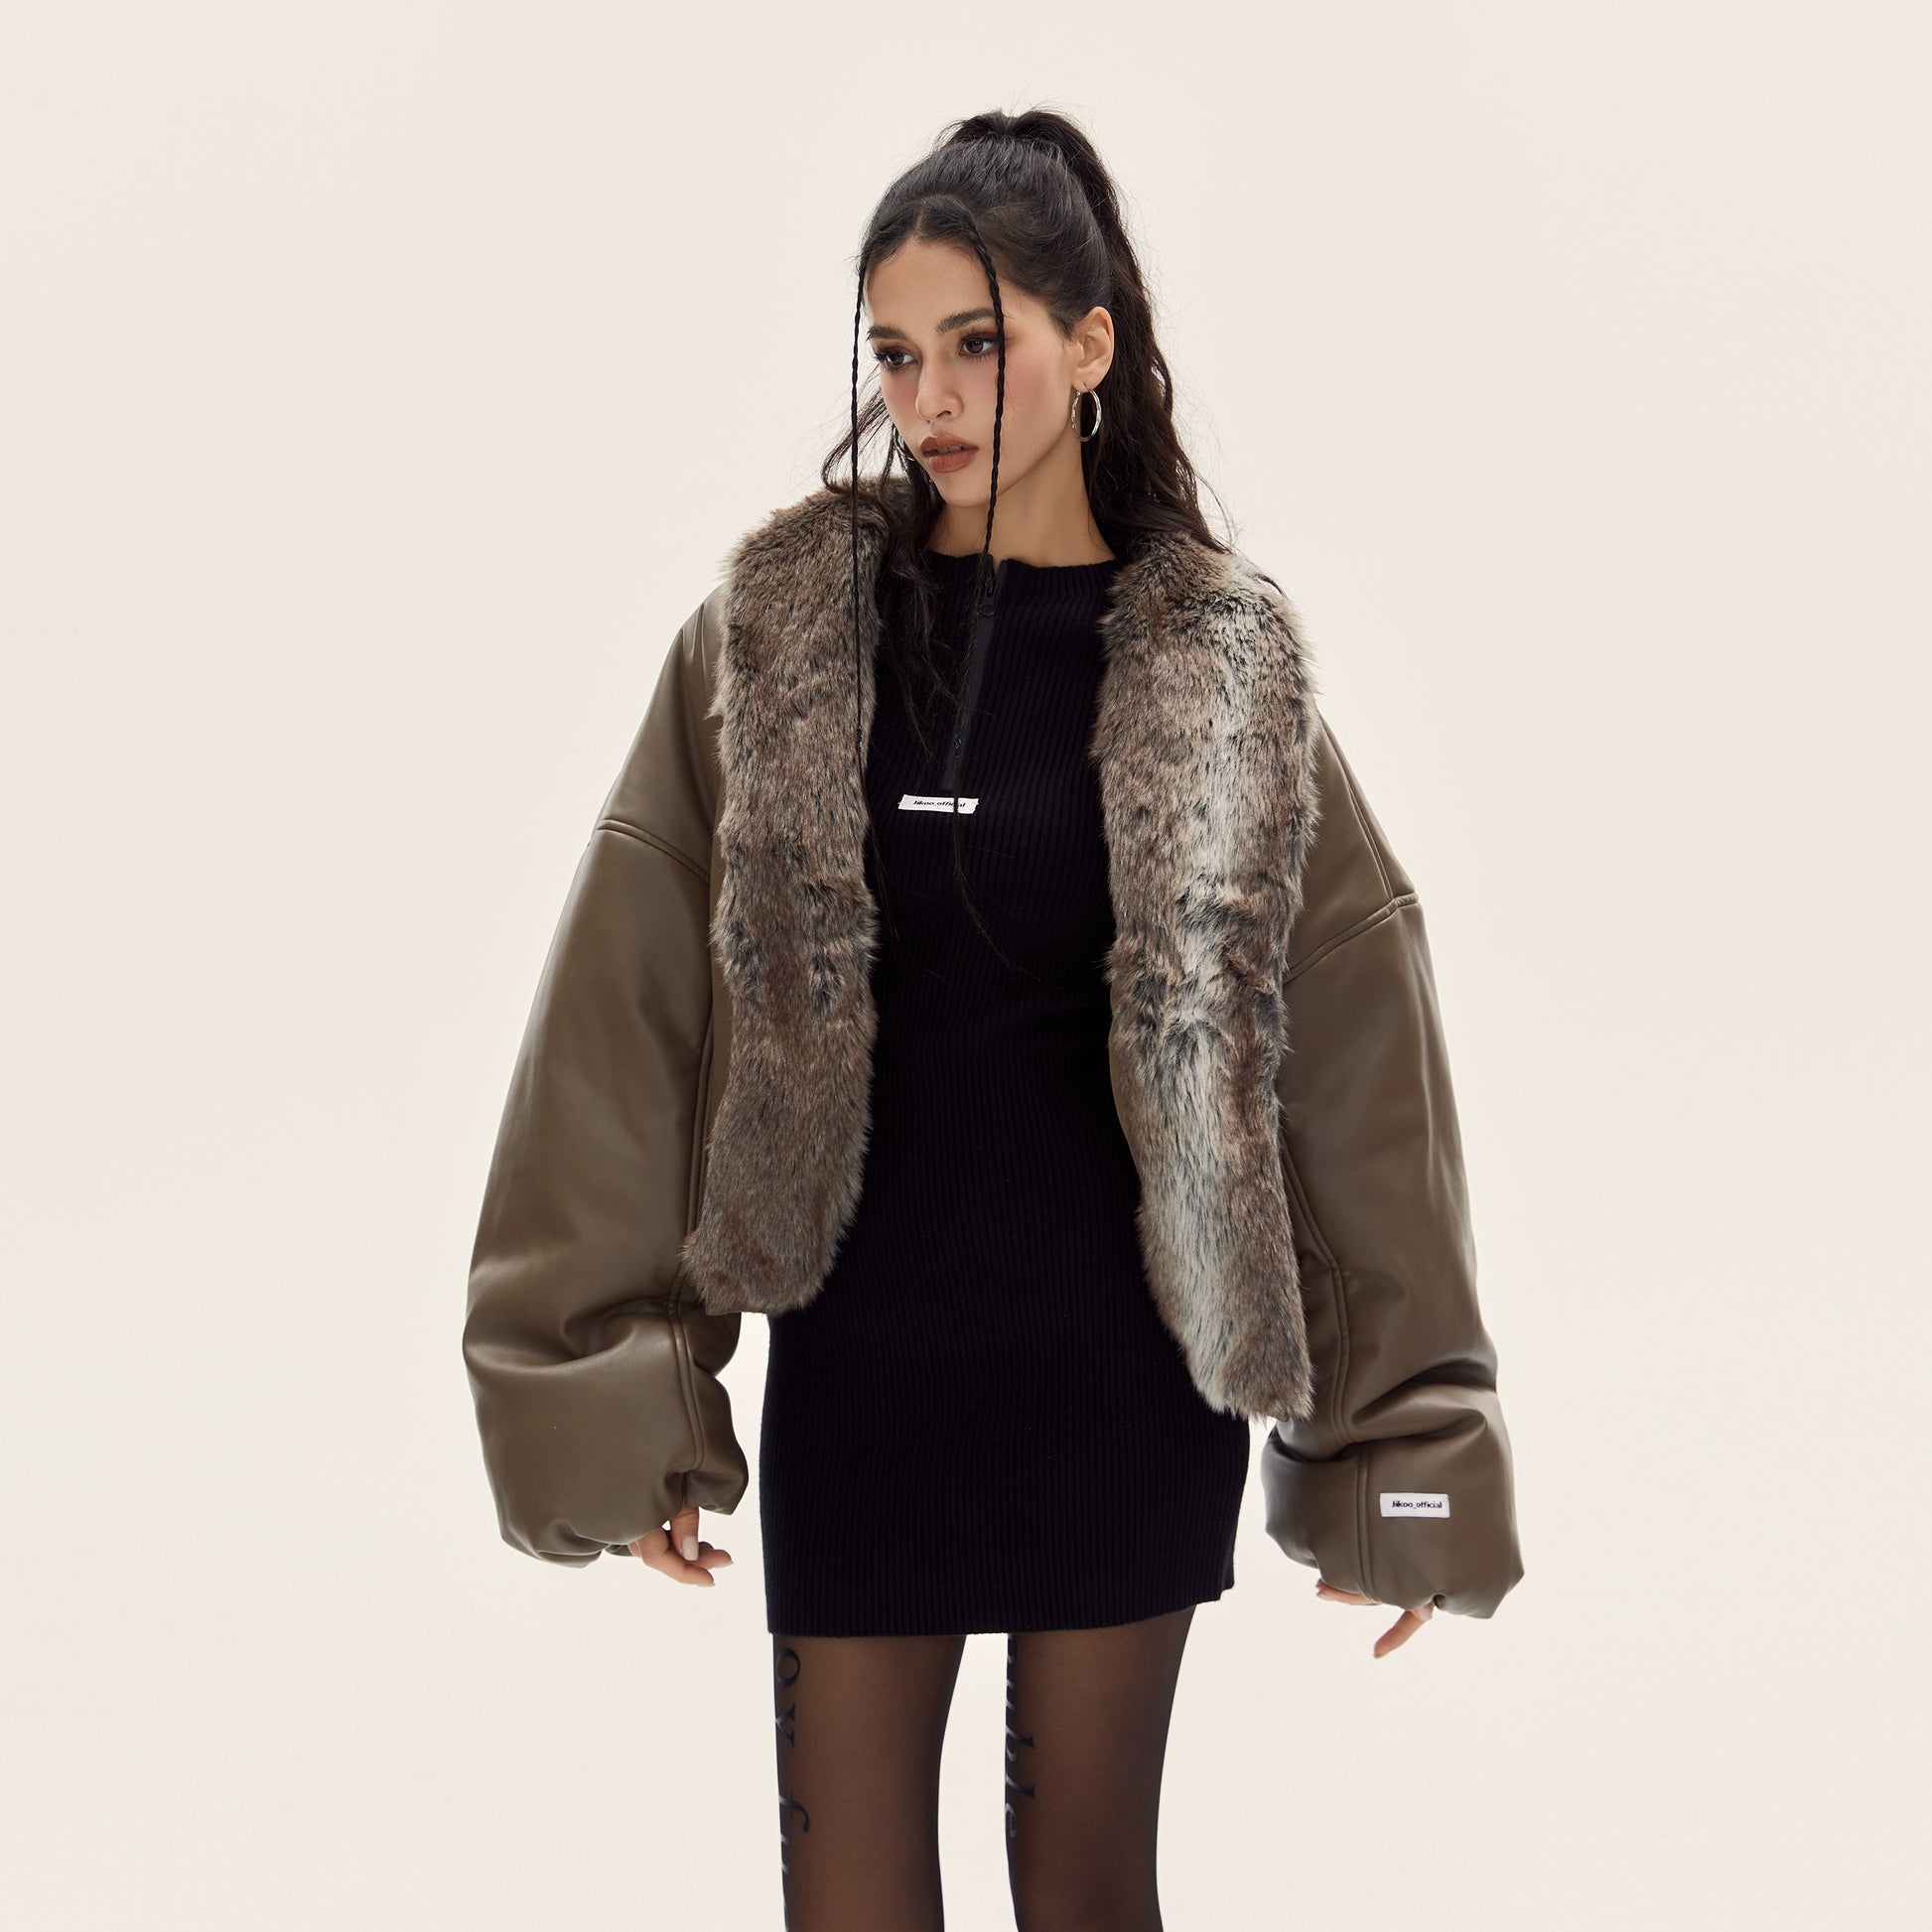 Winter clothes with a sense of luxury plus plush warmth